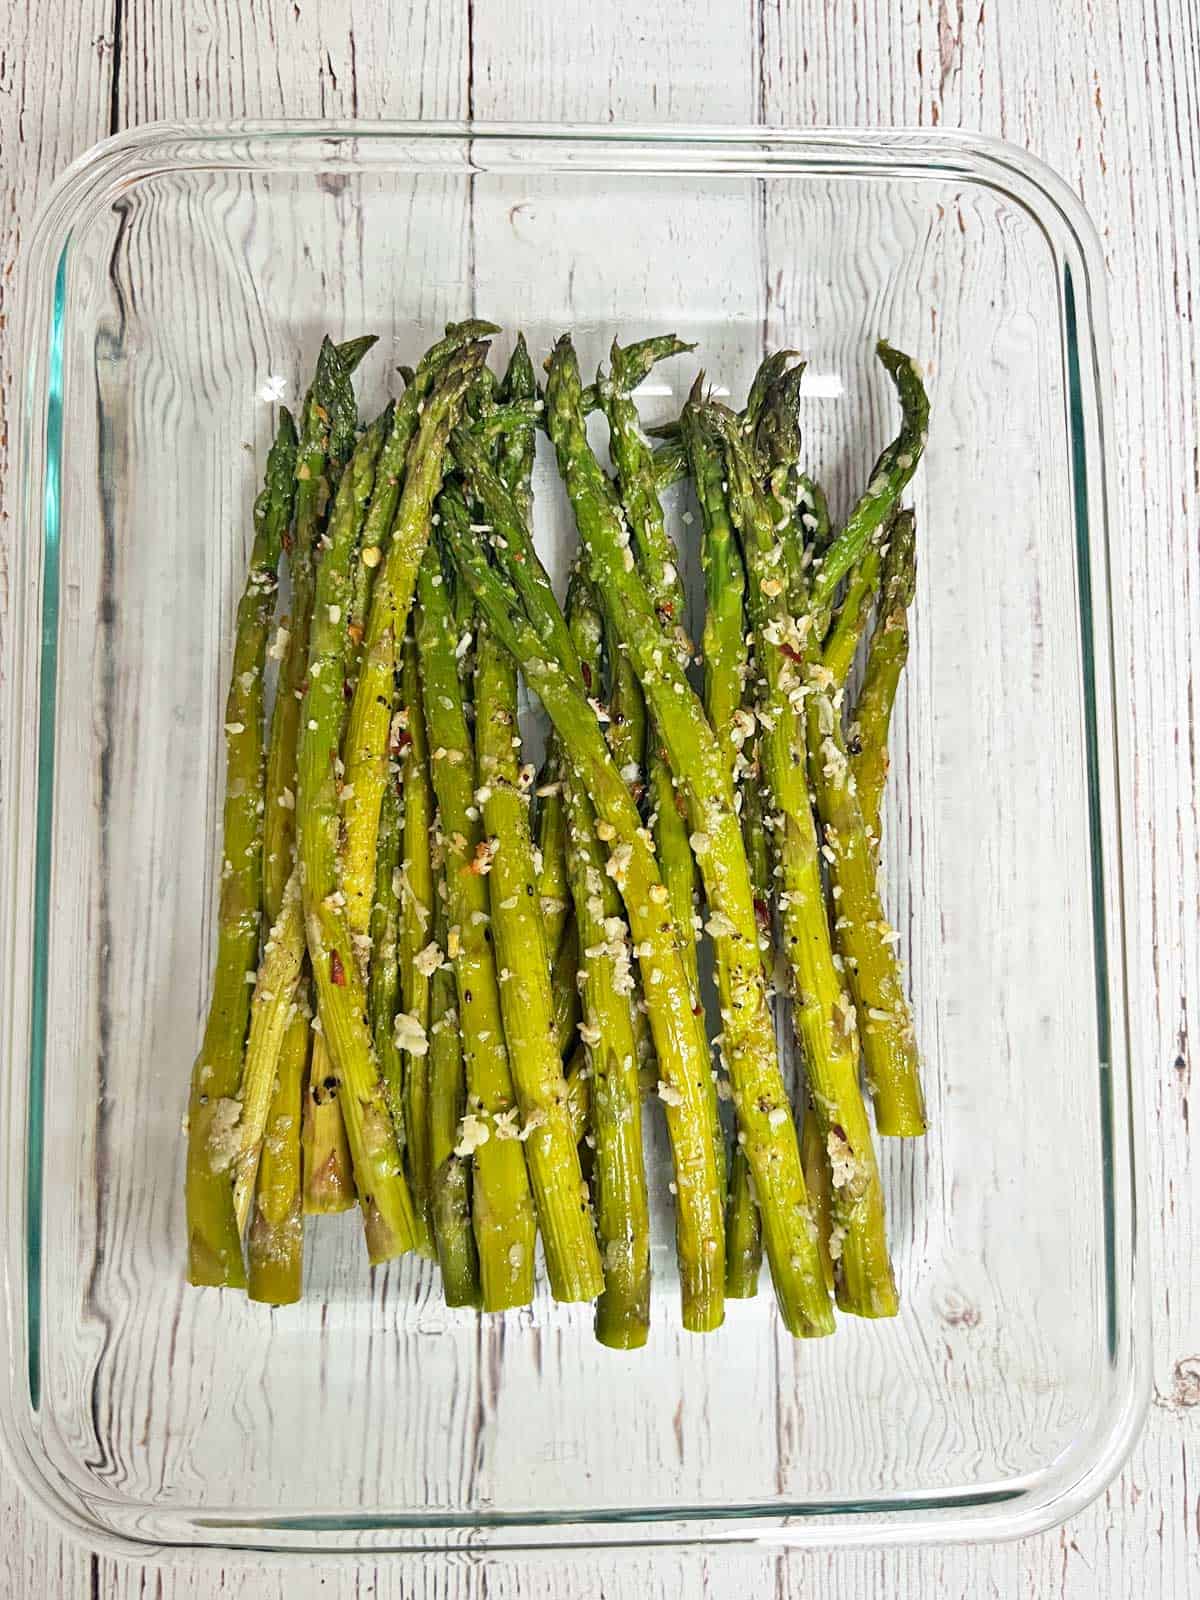 Roasted asparagus leftovers are stored in a glass food storage container.